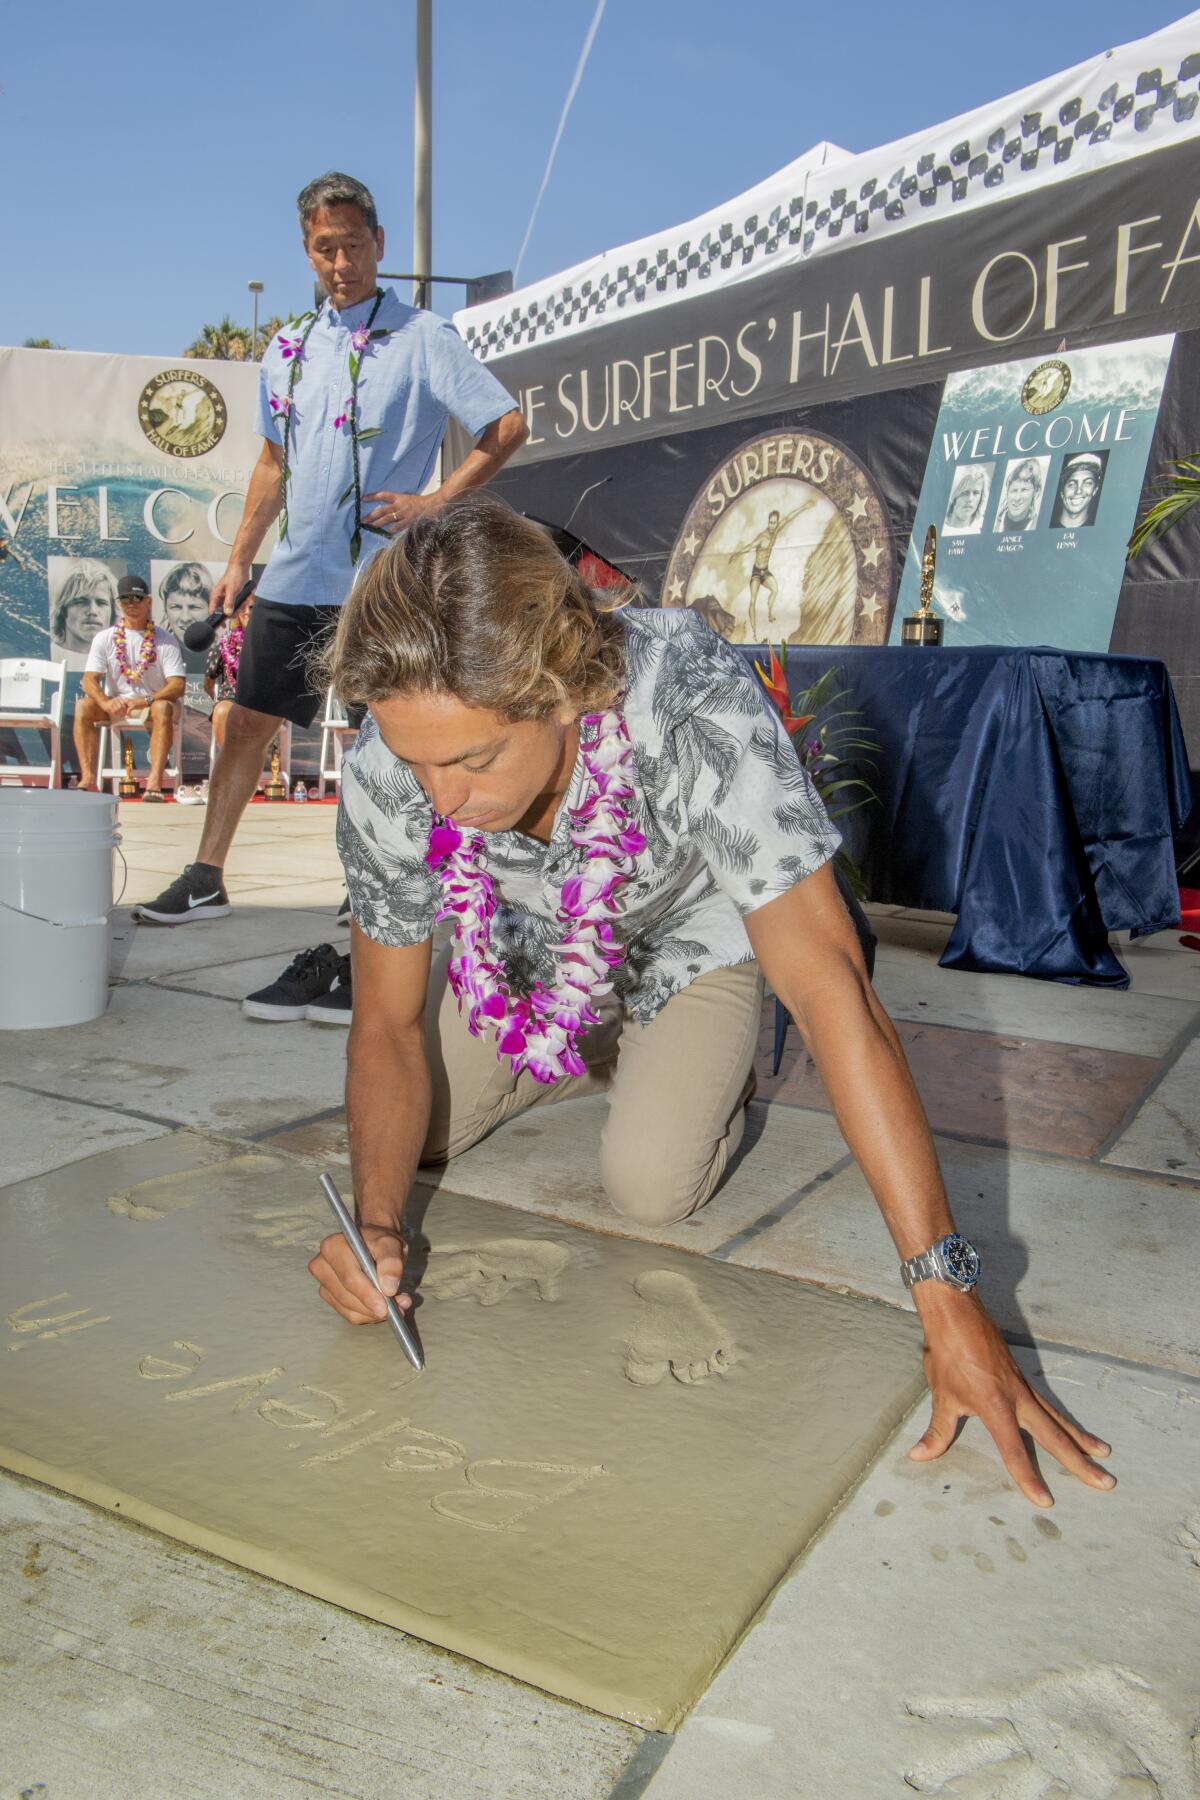 Kai Lenny, an all-around water sports athlete, writes "Believe in yourself" in wet cement Friday during his induction to the Surfers' Hall of Fame in Huntington Beach.